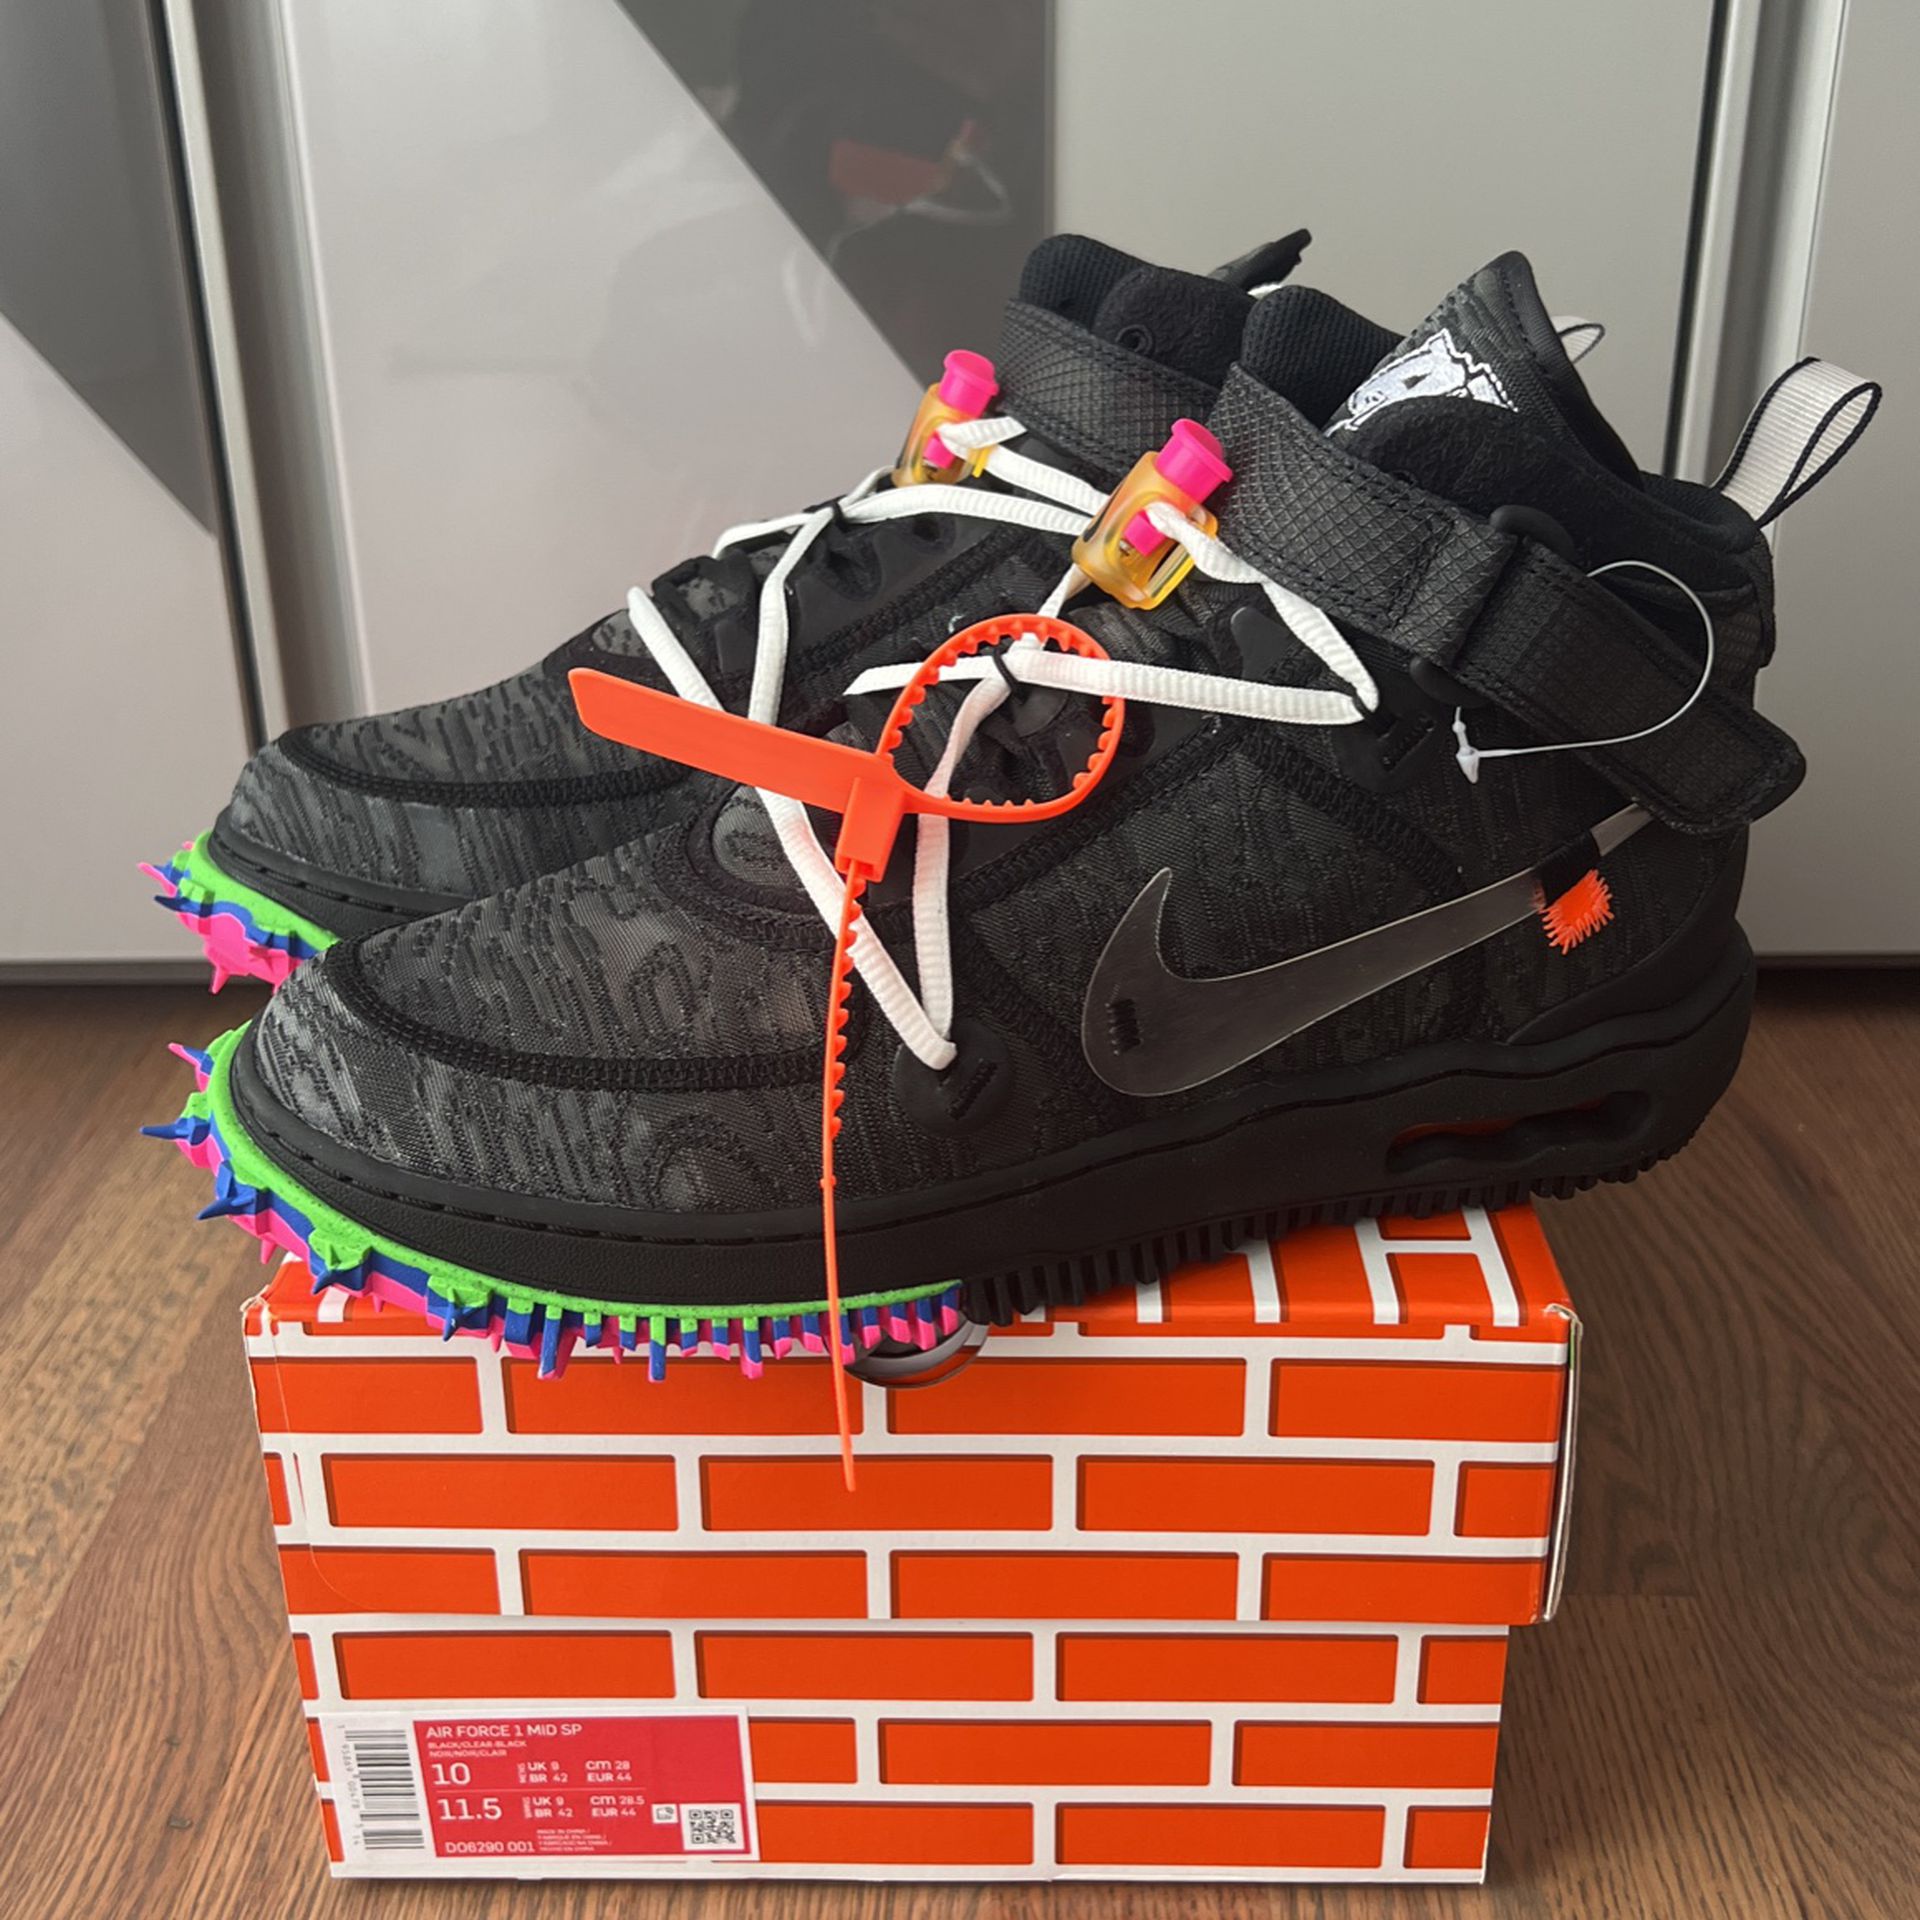 struik Specificiteit toenemen Nike Off White Air Force 1 Mid SP Black for Sale in Chappaqua, NY - OfferUp